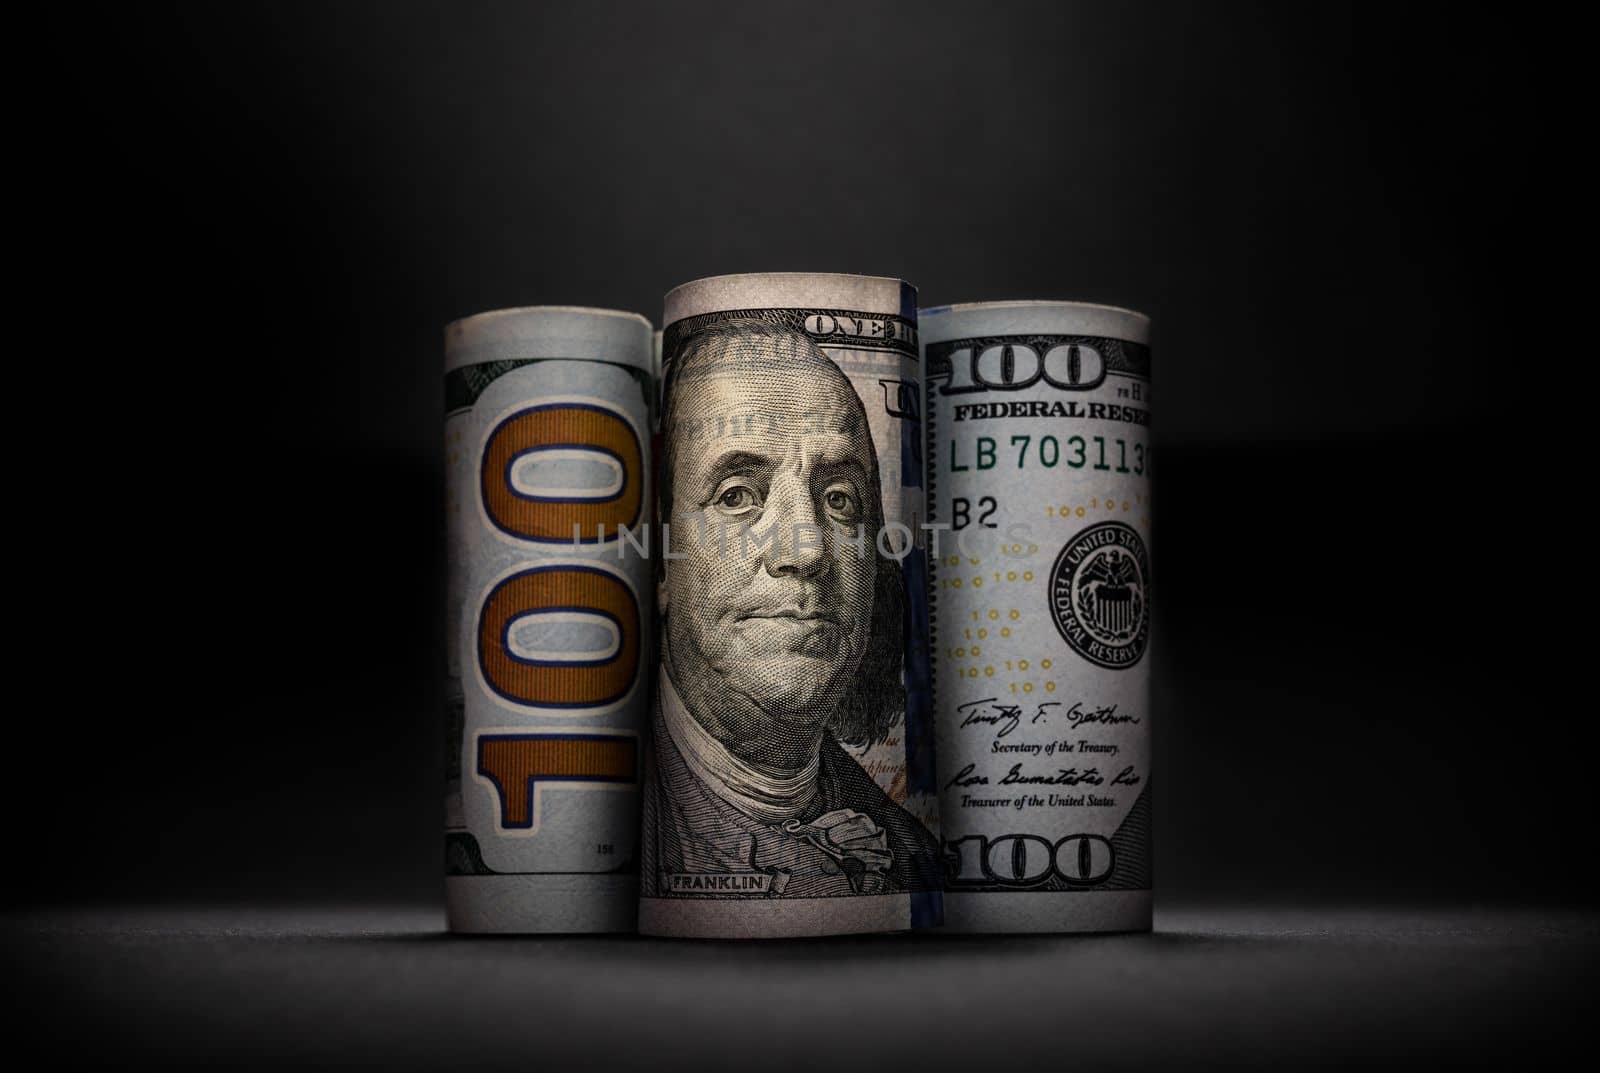 Three different images of 100 US dollars in rolls on dark background by Sonat